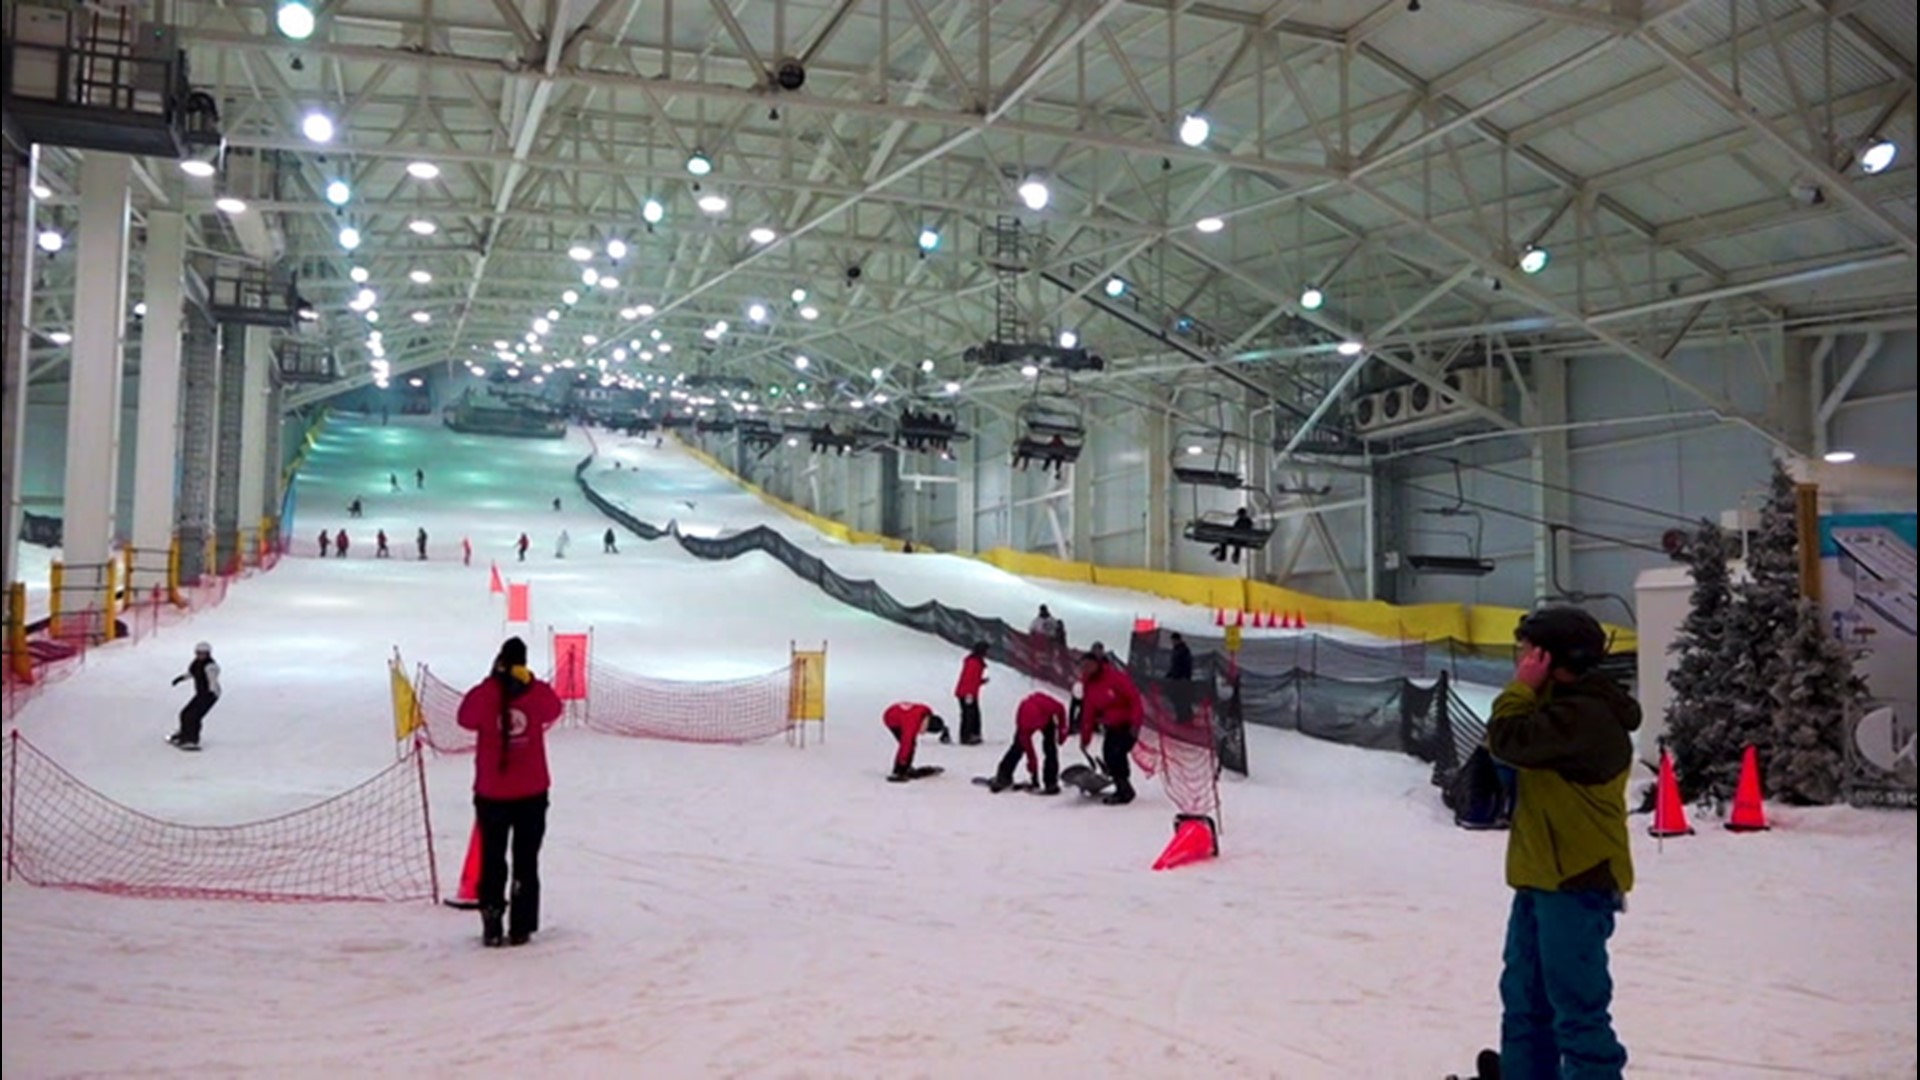 It's been a mild and relatively uneventful winter so far, but that's not a problem for North America's first indoor ski slope in East Rutherford, New Jersey.